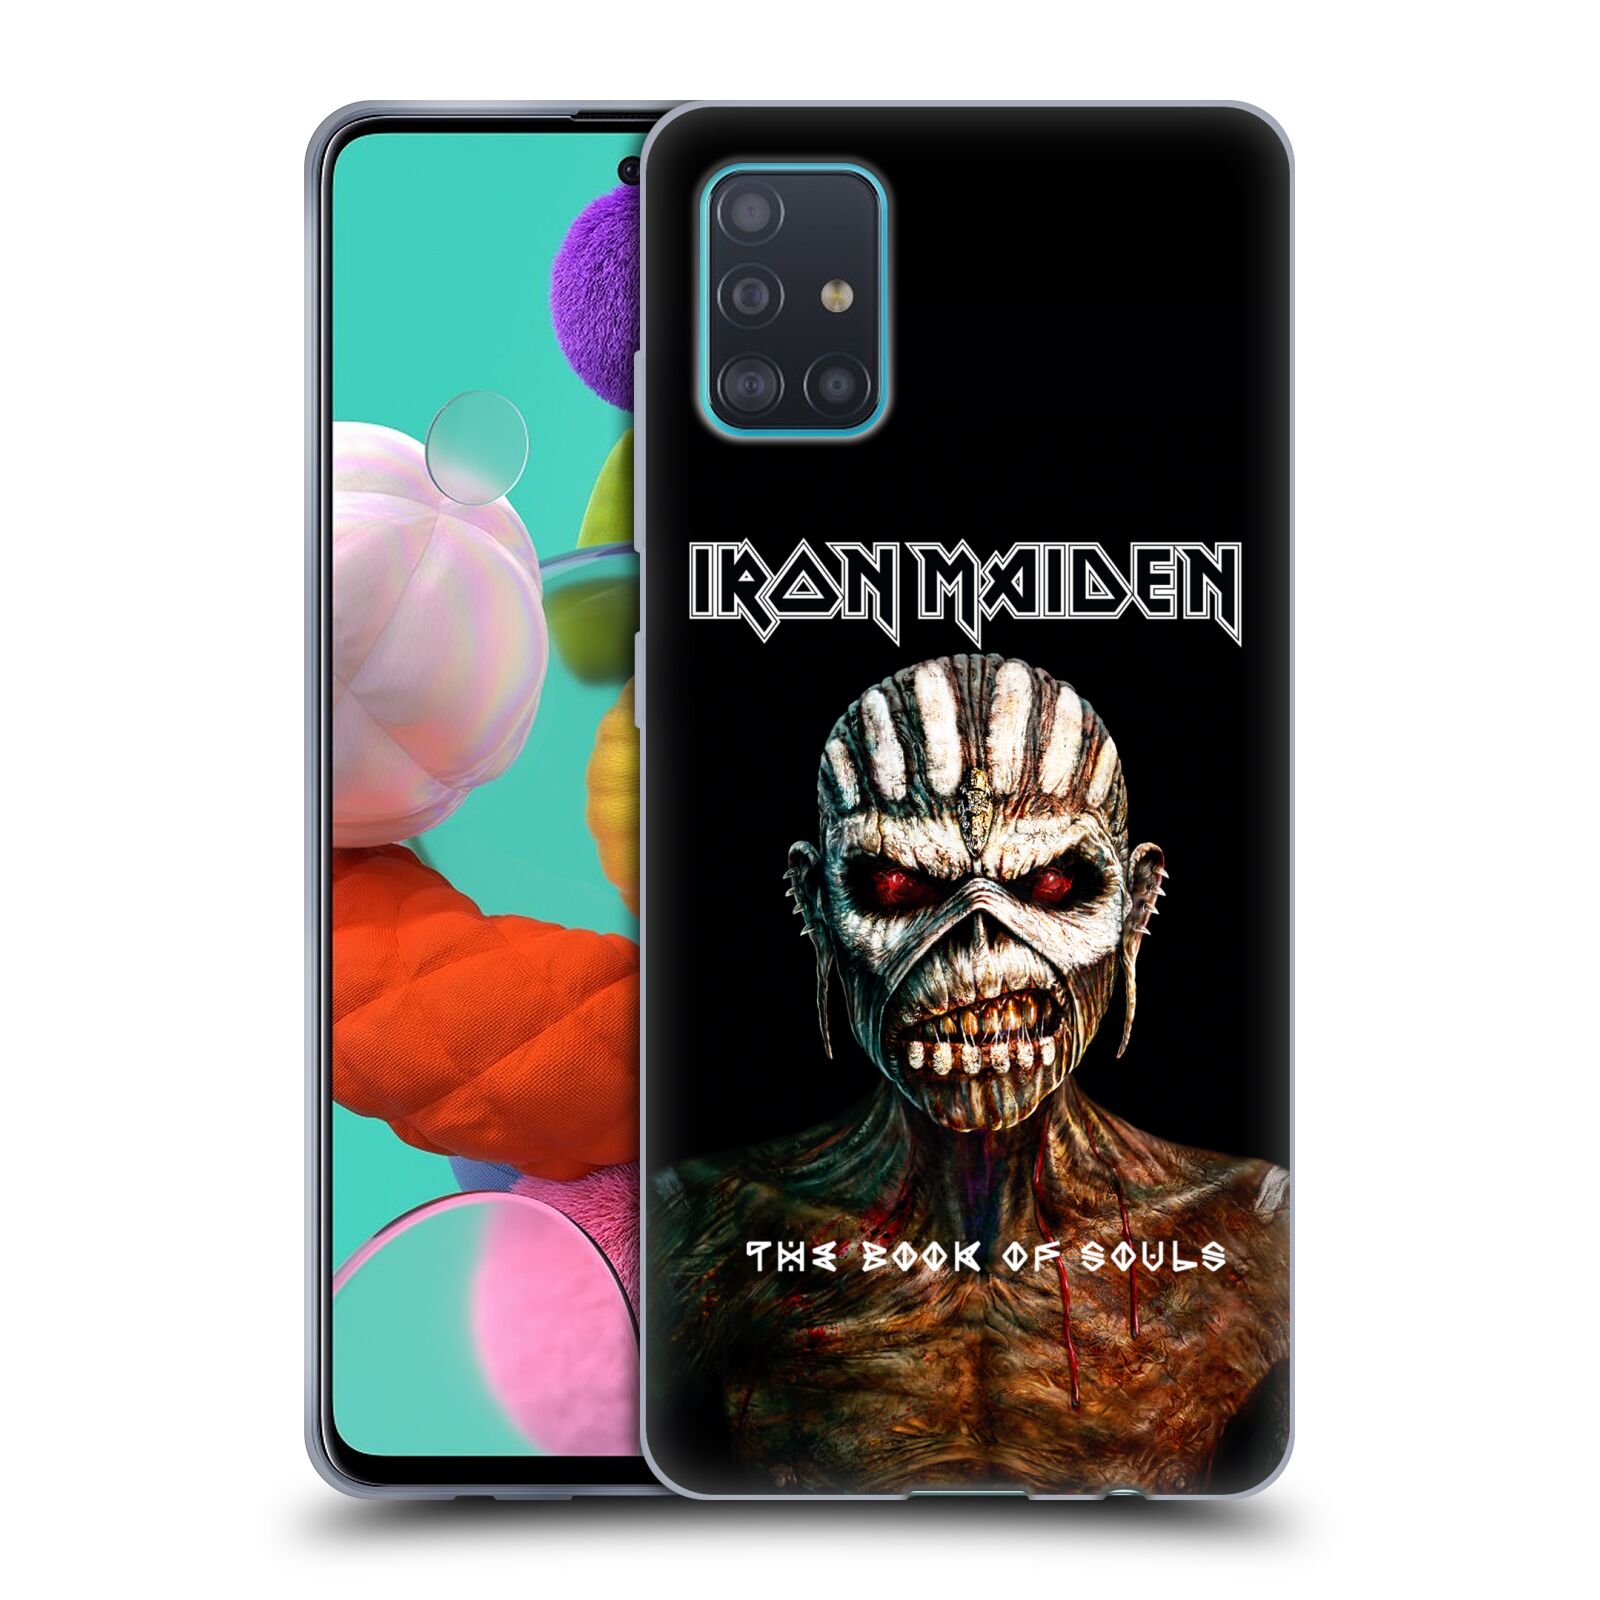 Silikonové pouzdro na mobil Samsung Galaxy A51 - Head Case - Iron Maiden - The Book Of Souls (Silikonový kryt, obal, pouzdro na mobilní telefon Samsung Galaxy A51 A515F Dual SIM s motivem Iron Maiden - The Book Of Souls)